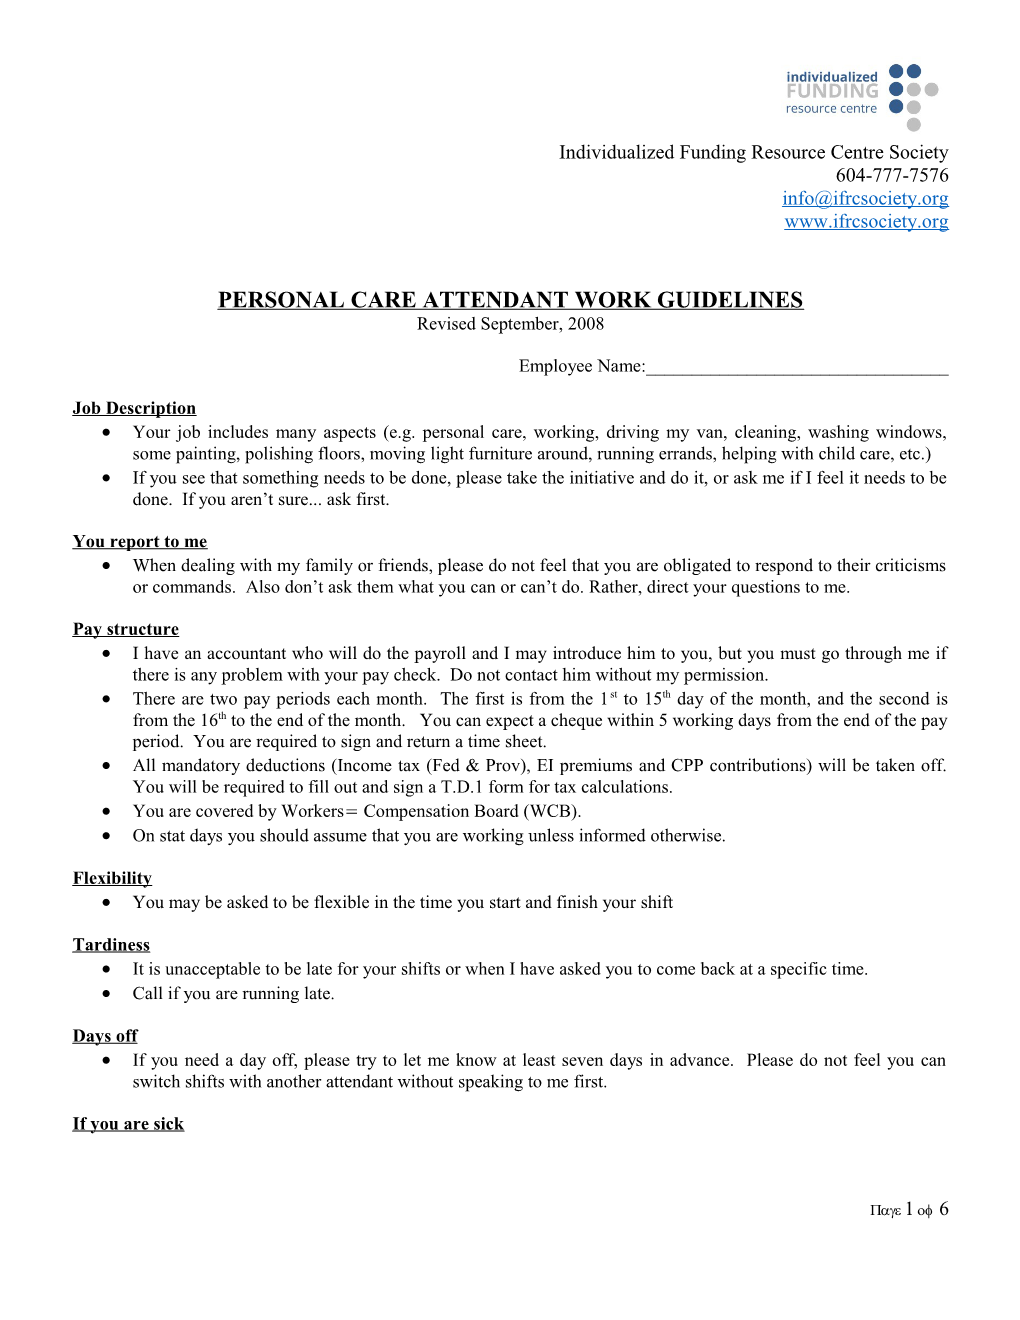 Personal Care Attendant Work Guidelines